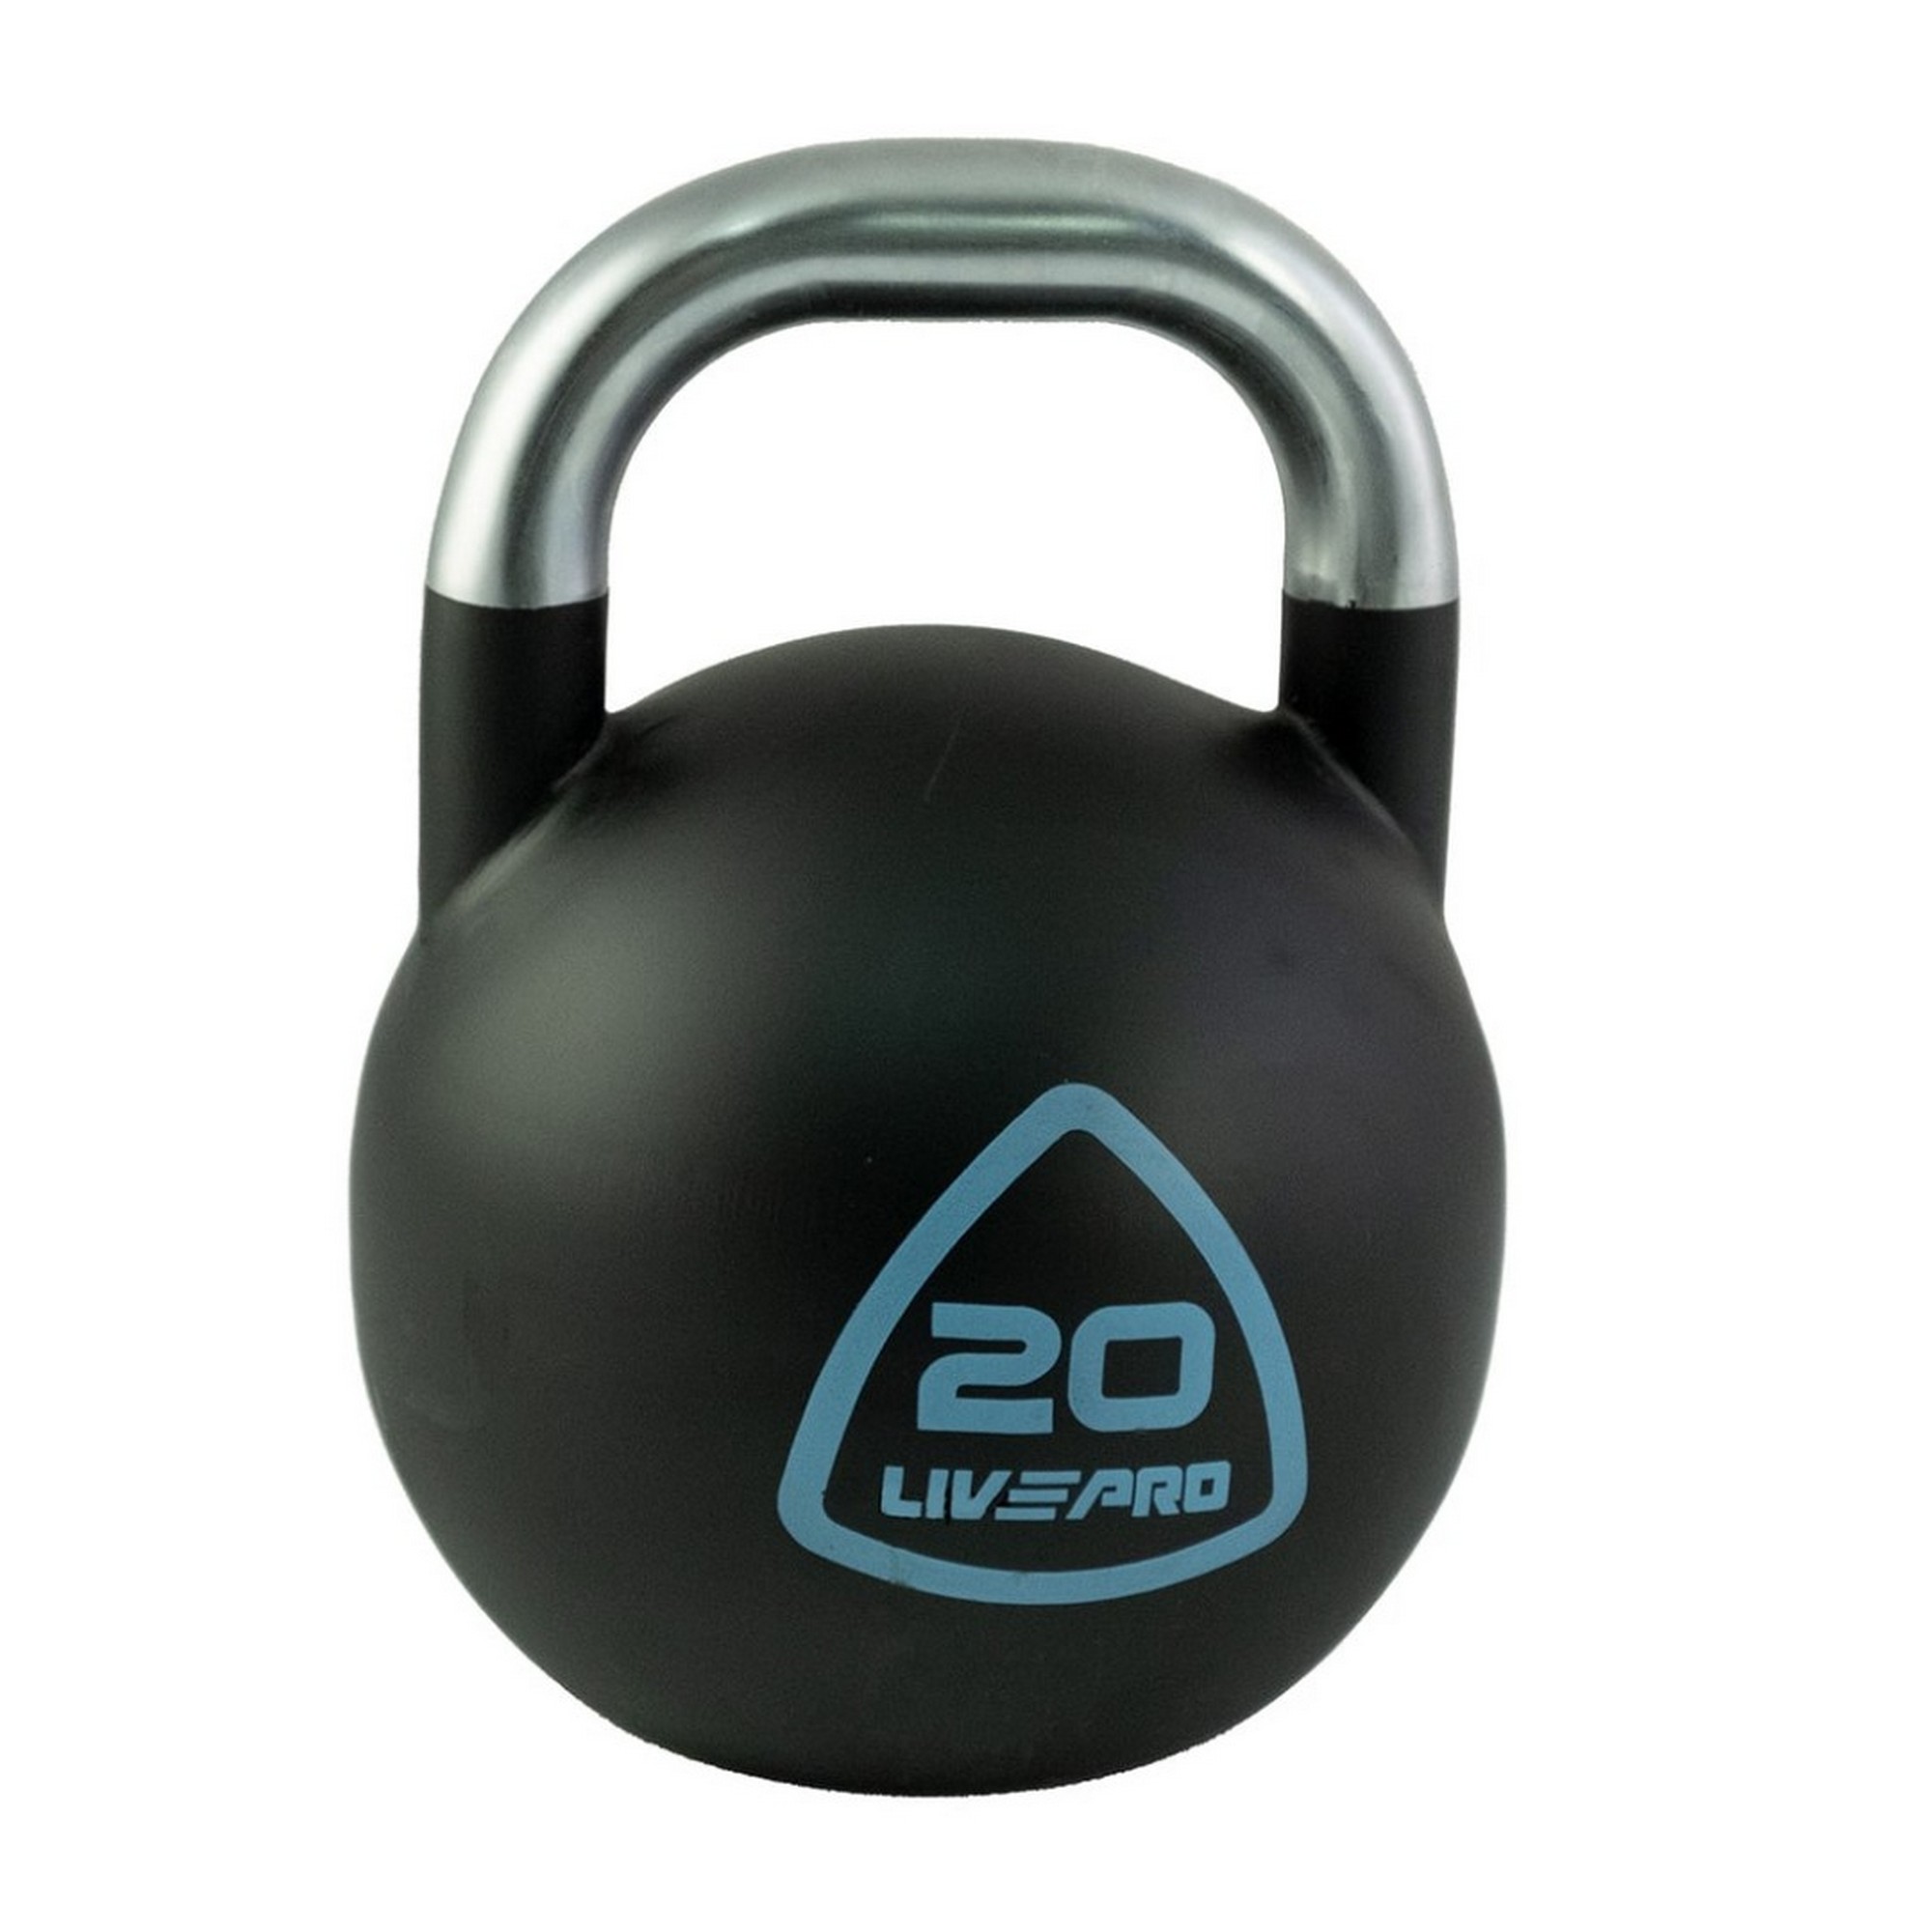   20  Live Pro Steel Competition Kettlebell LP8042-20